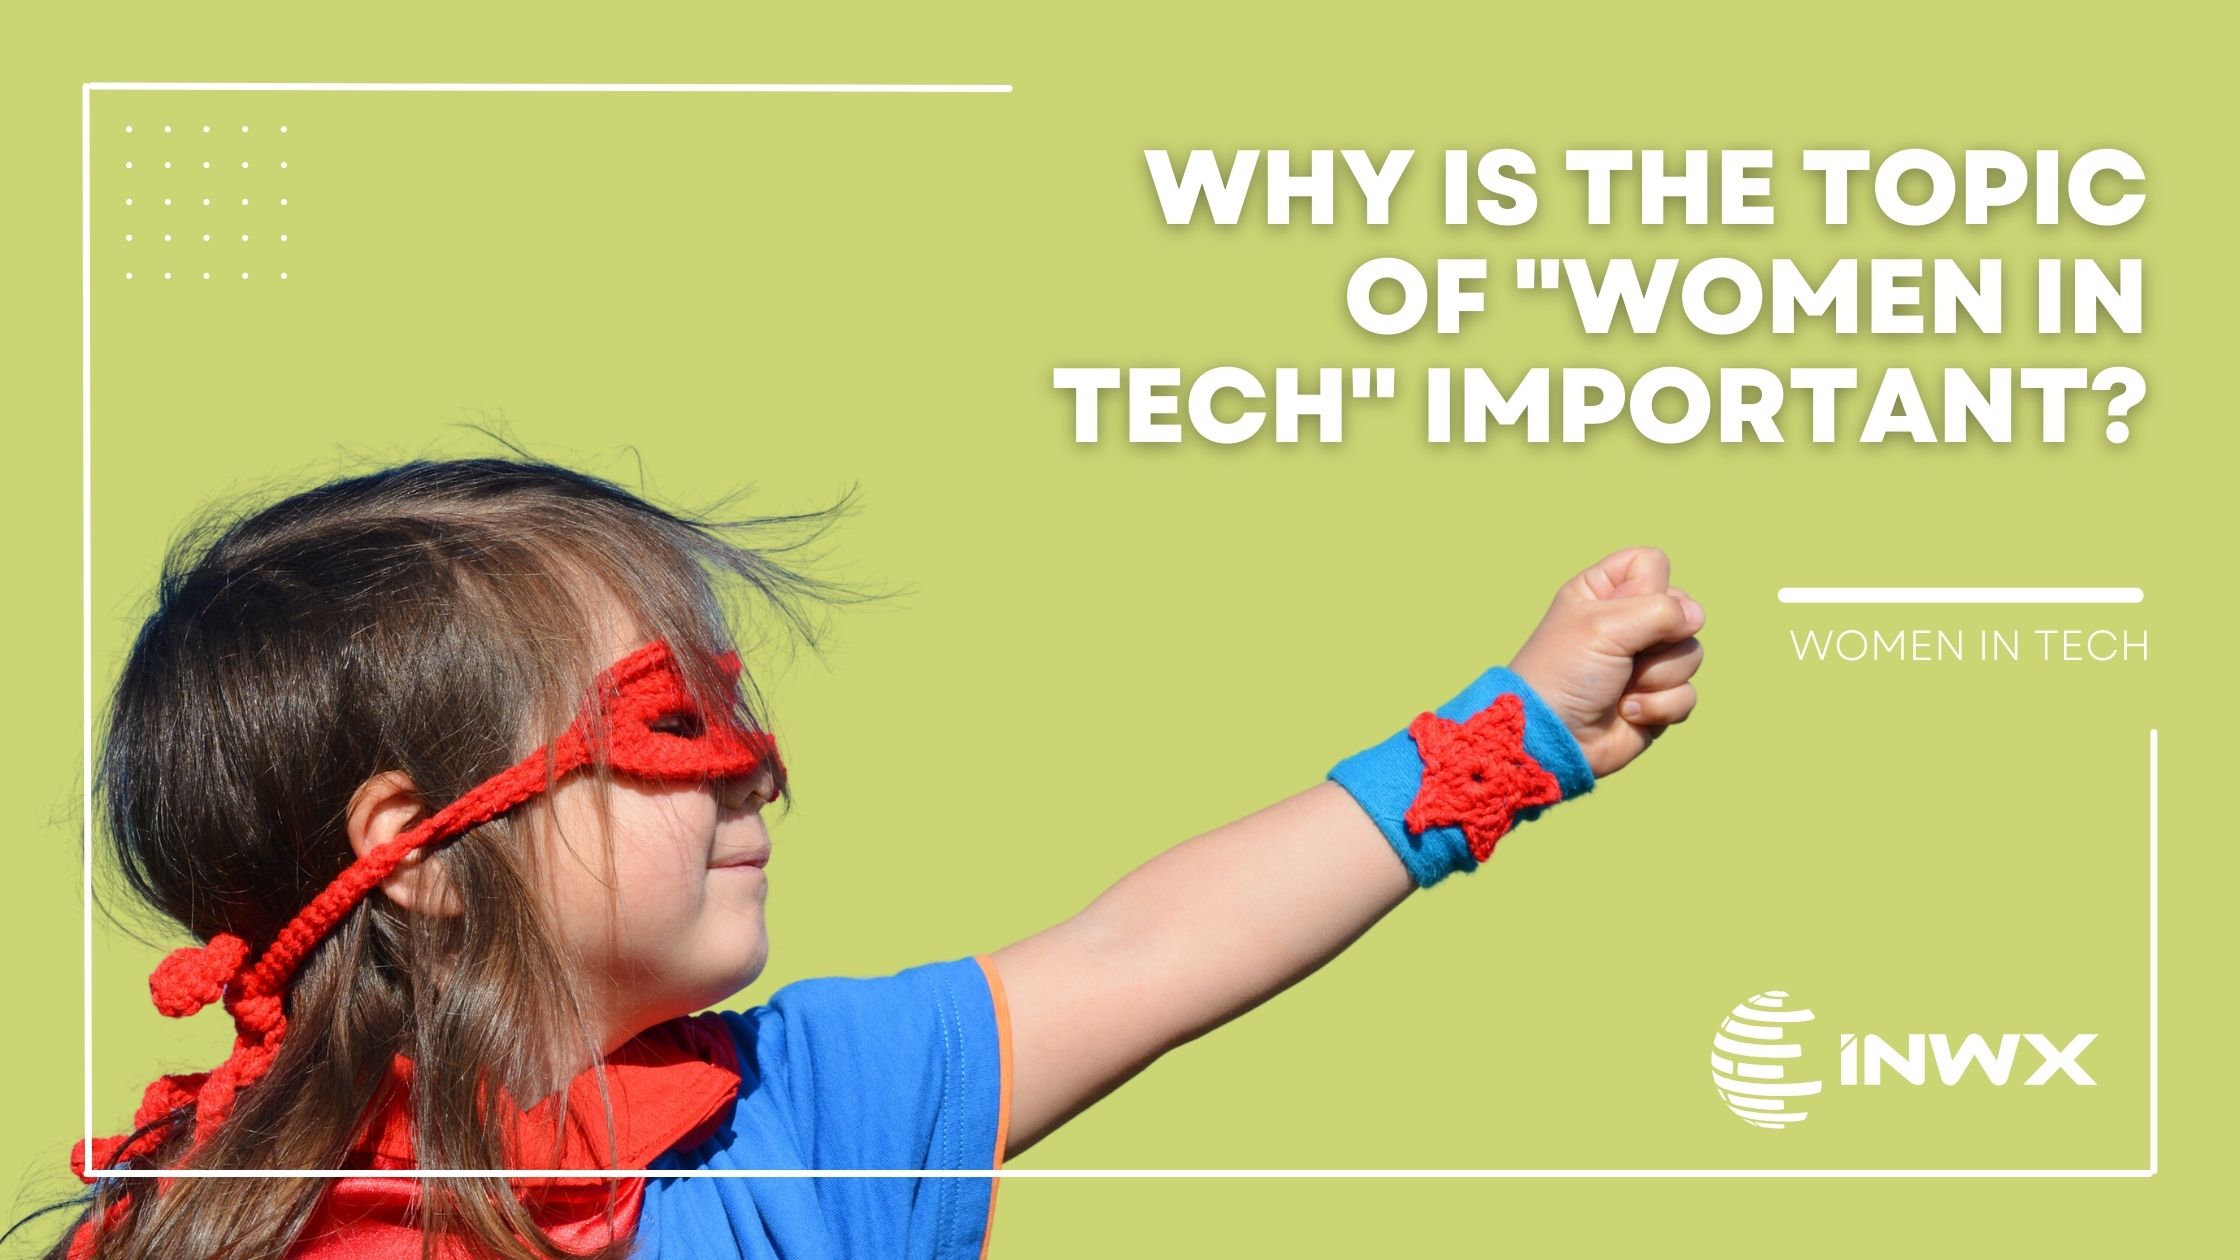 Girl in super-women costume pointing towards title "Why is the topic of Women in Tech important"?